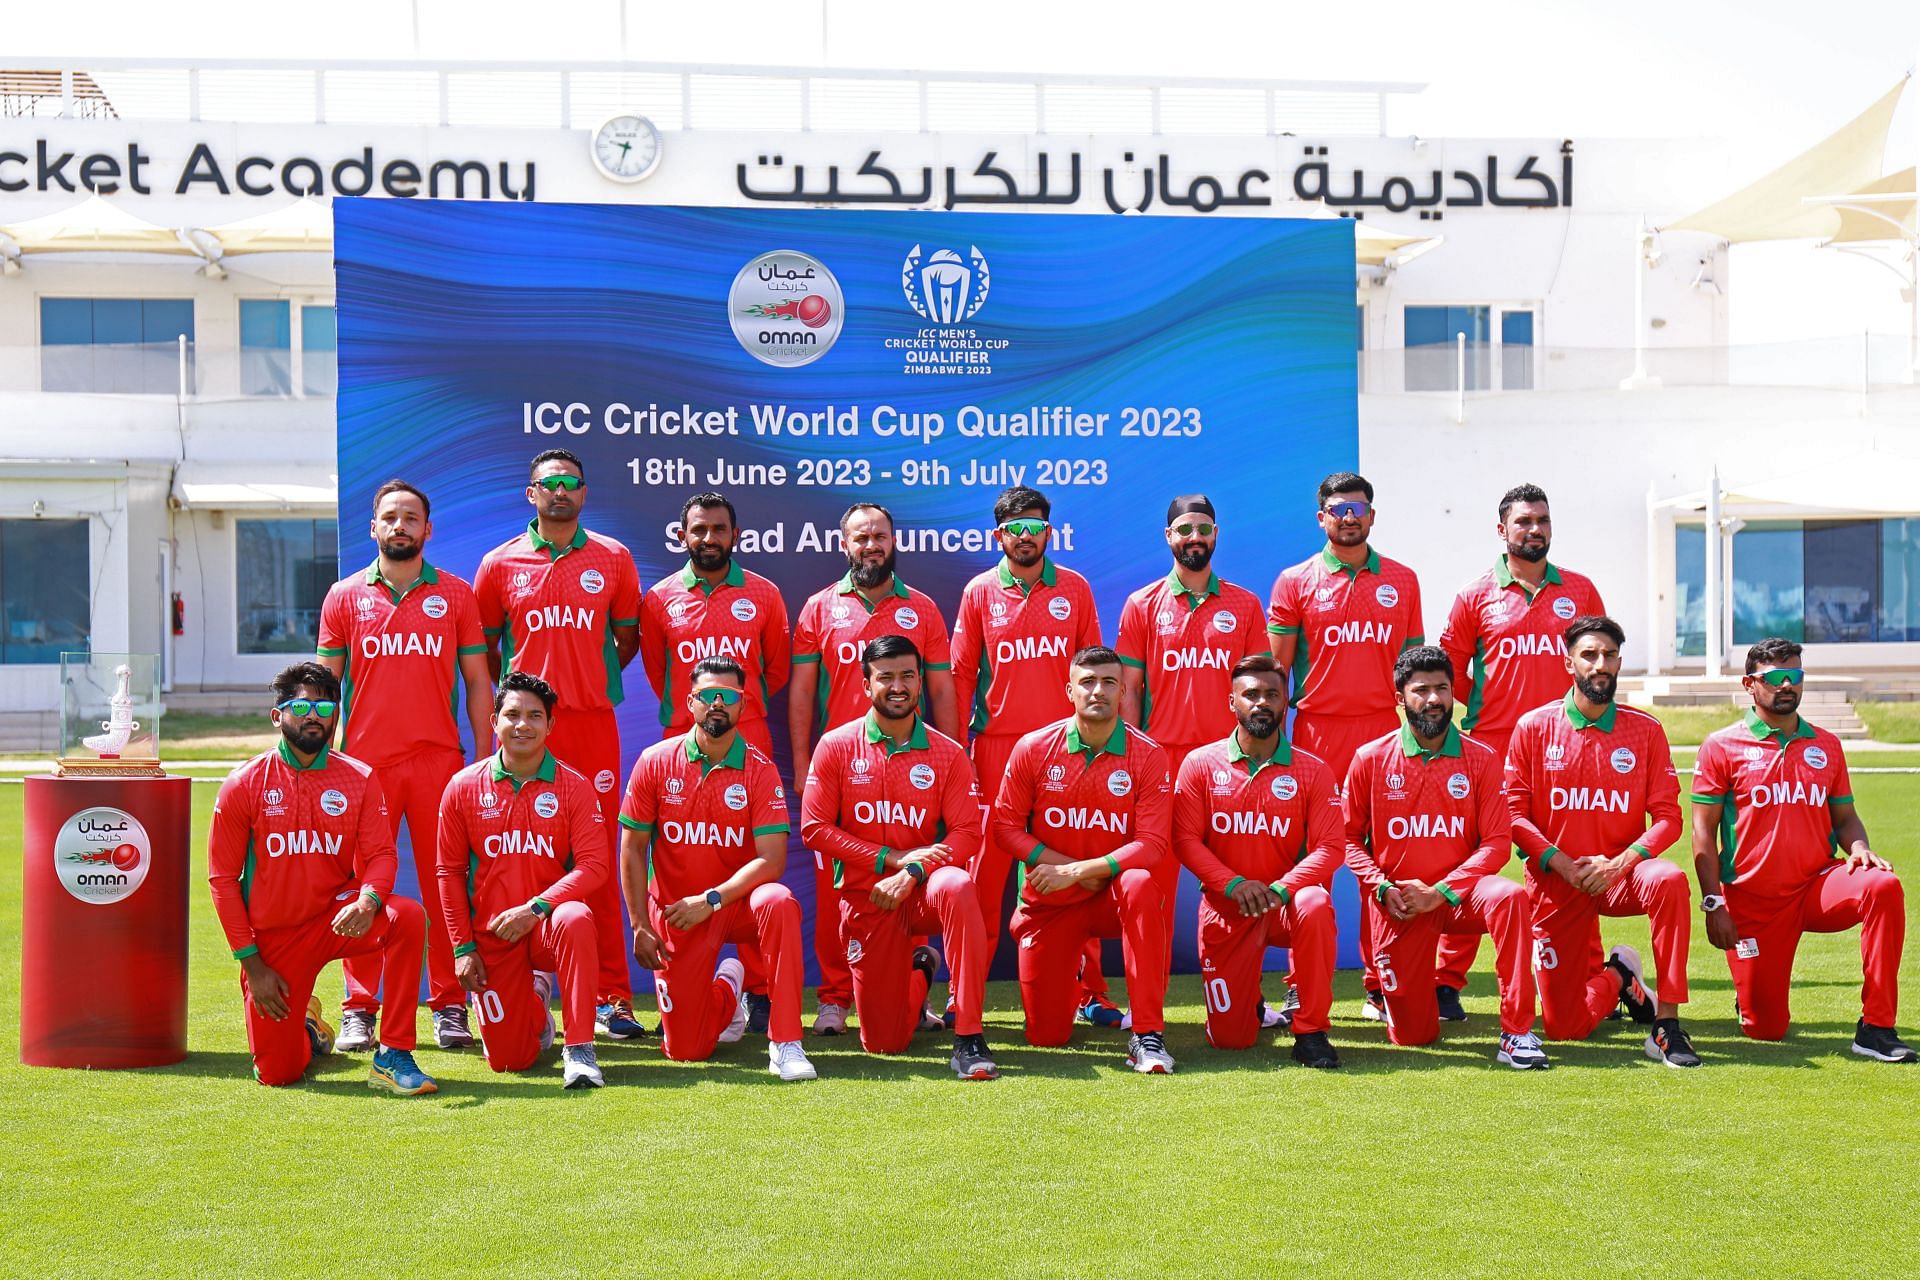 Oman Cricket Team poses for a group photo (Image Credits: ICC Cricket&nbsp;World&nbsp;Cup)